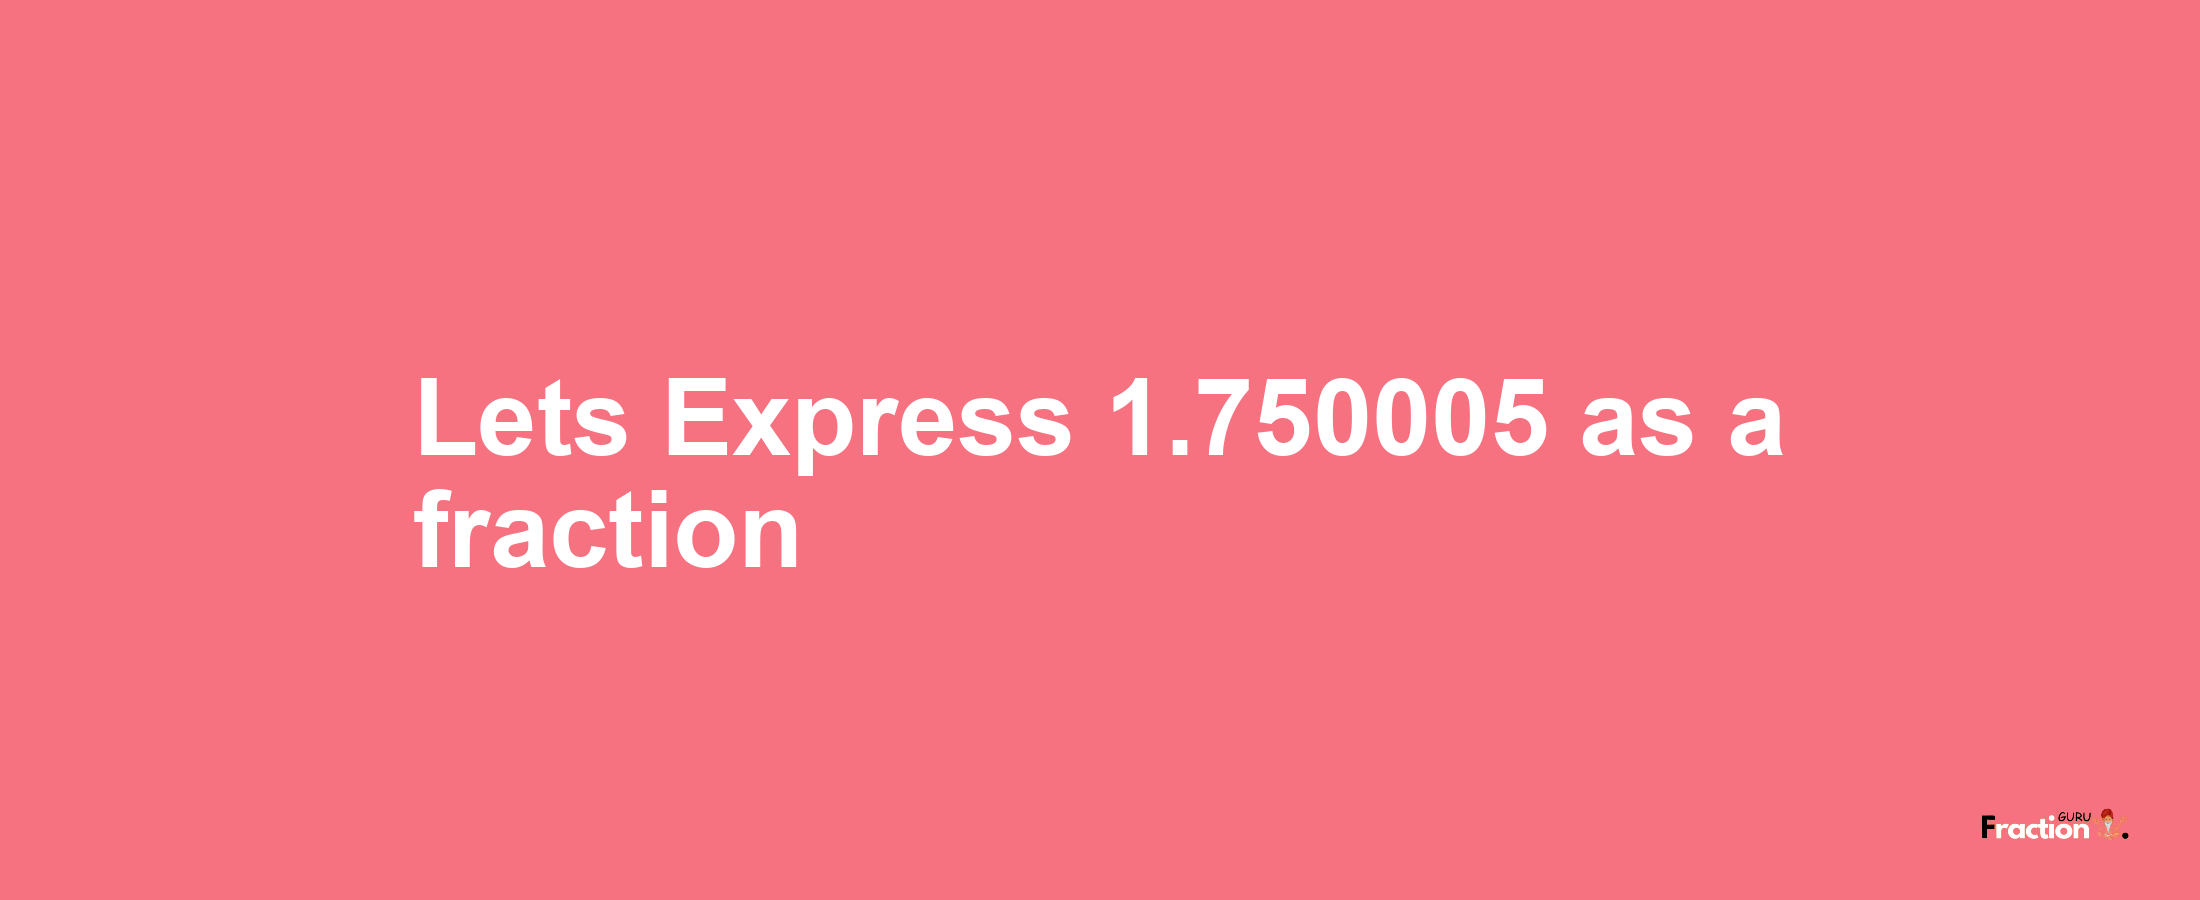 Lets Express 1.750005 as afraction